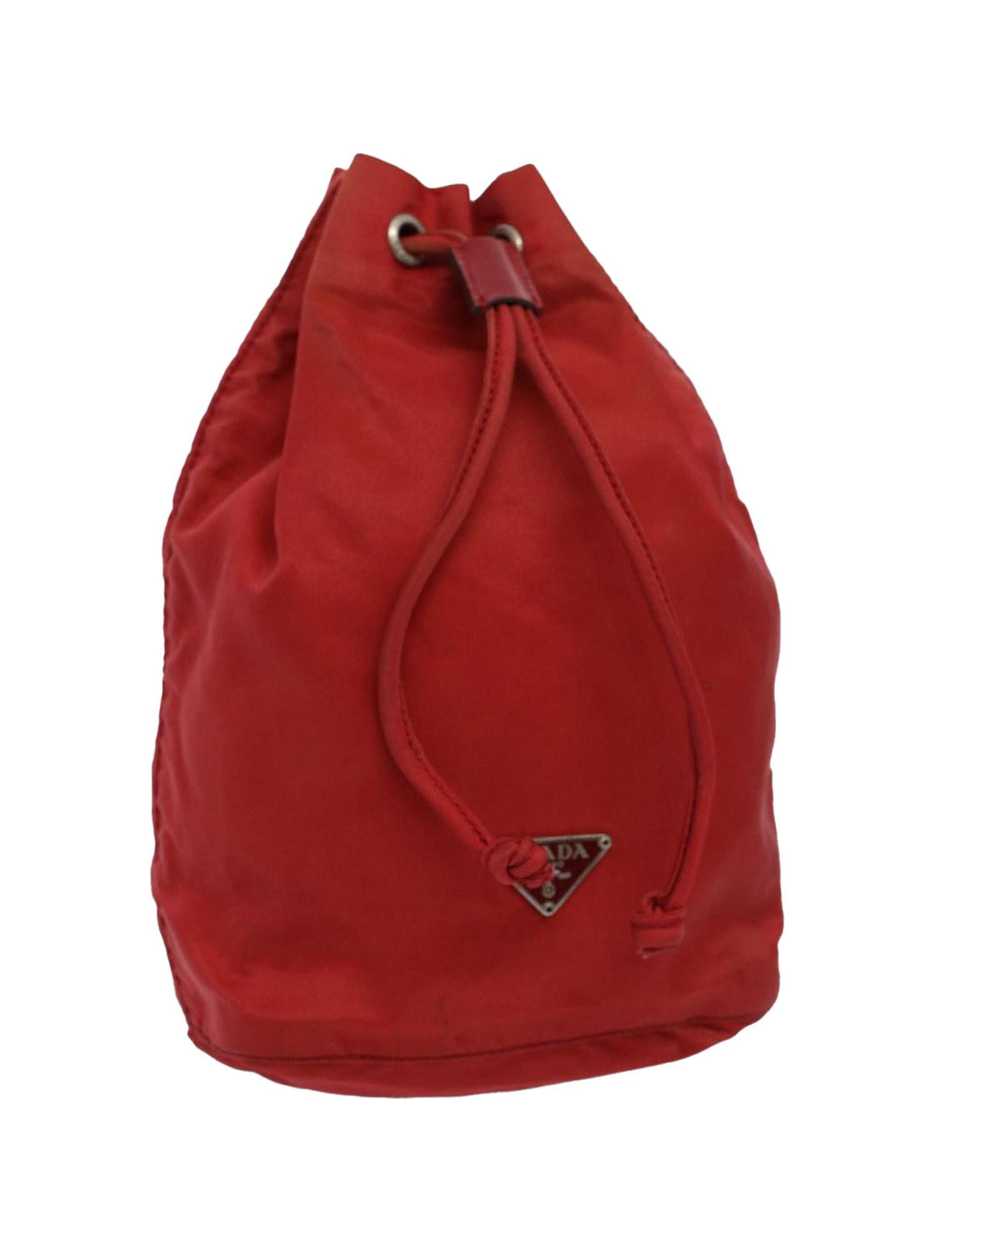 Prada Luxury Red Synthetic Bag - AB Condition - image 1